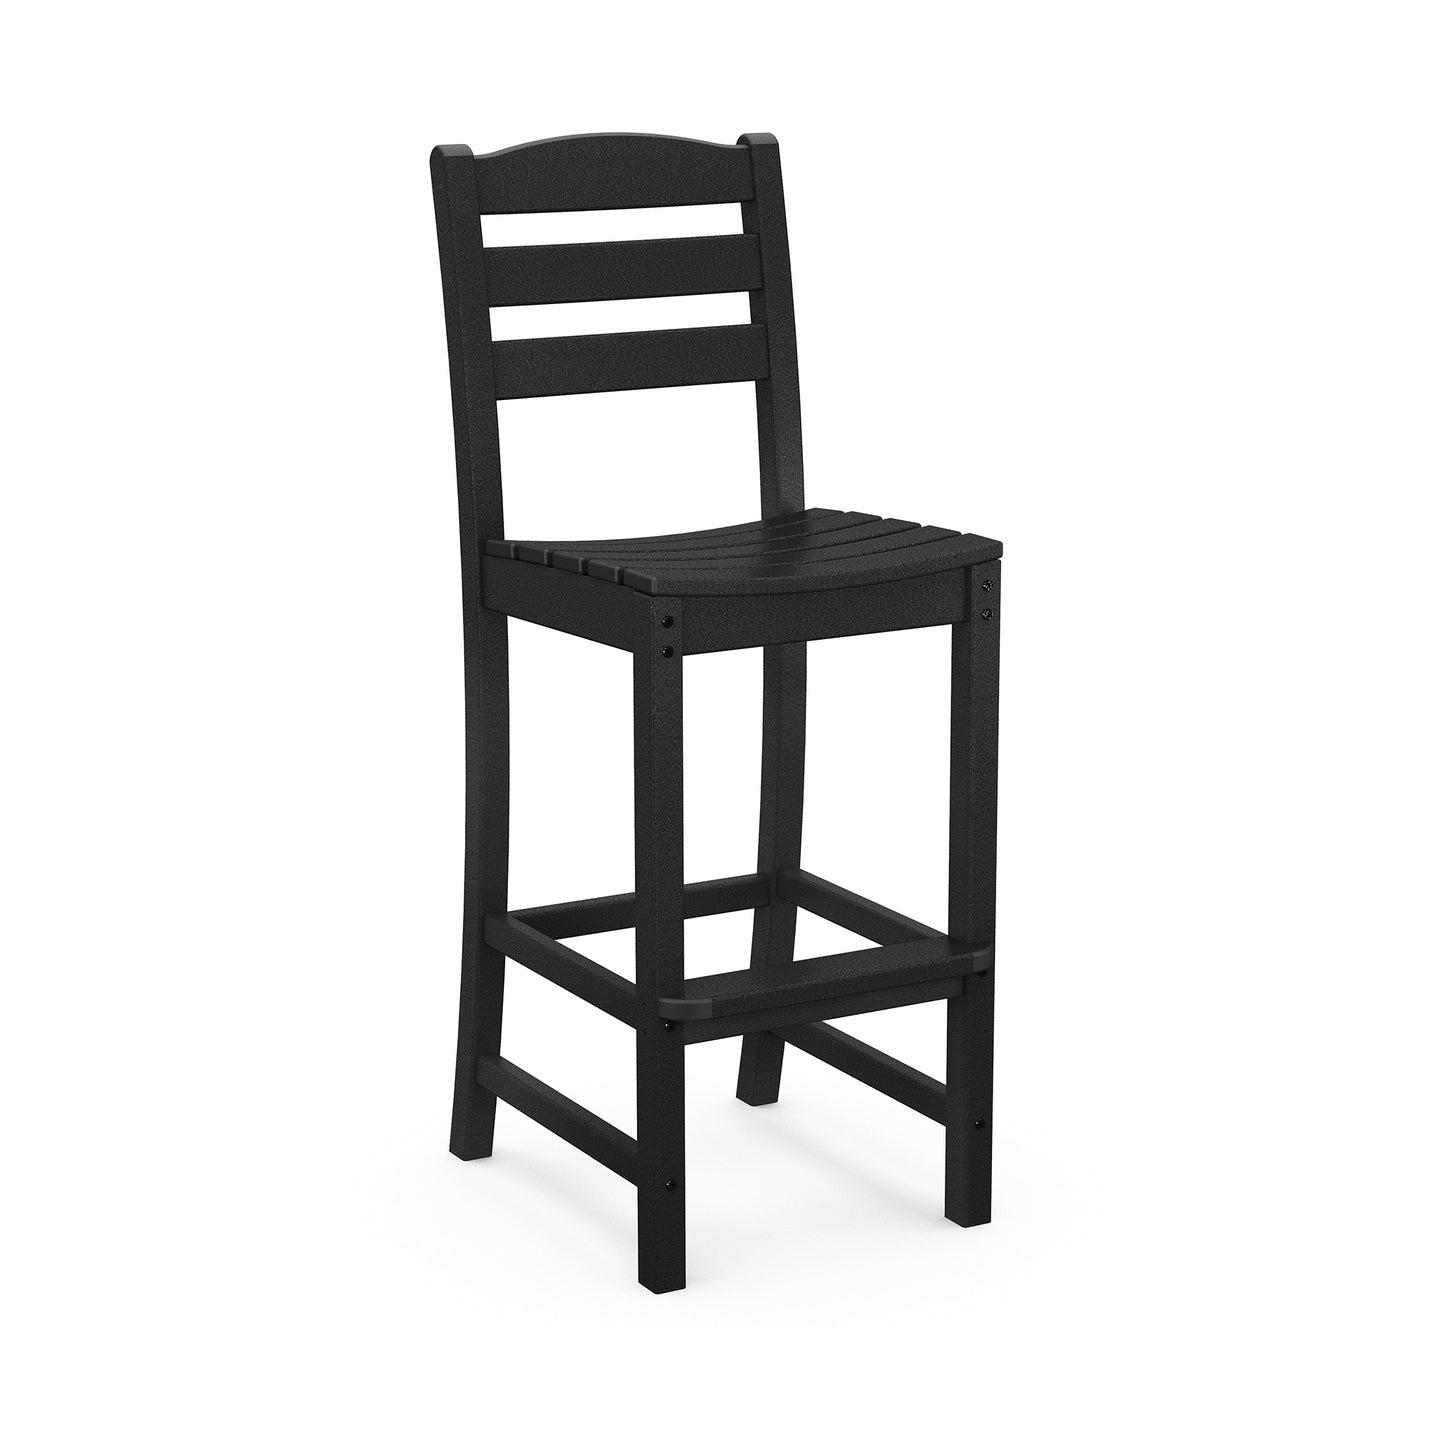 A black, modern-style POLYWOOD La Casa Cafe Outdoor Bar Side Chair with a high back and horizontal slats, made of weather-resistant material, standing against a white background.